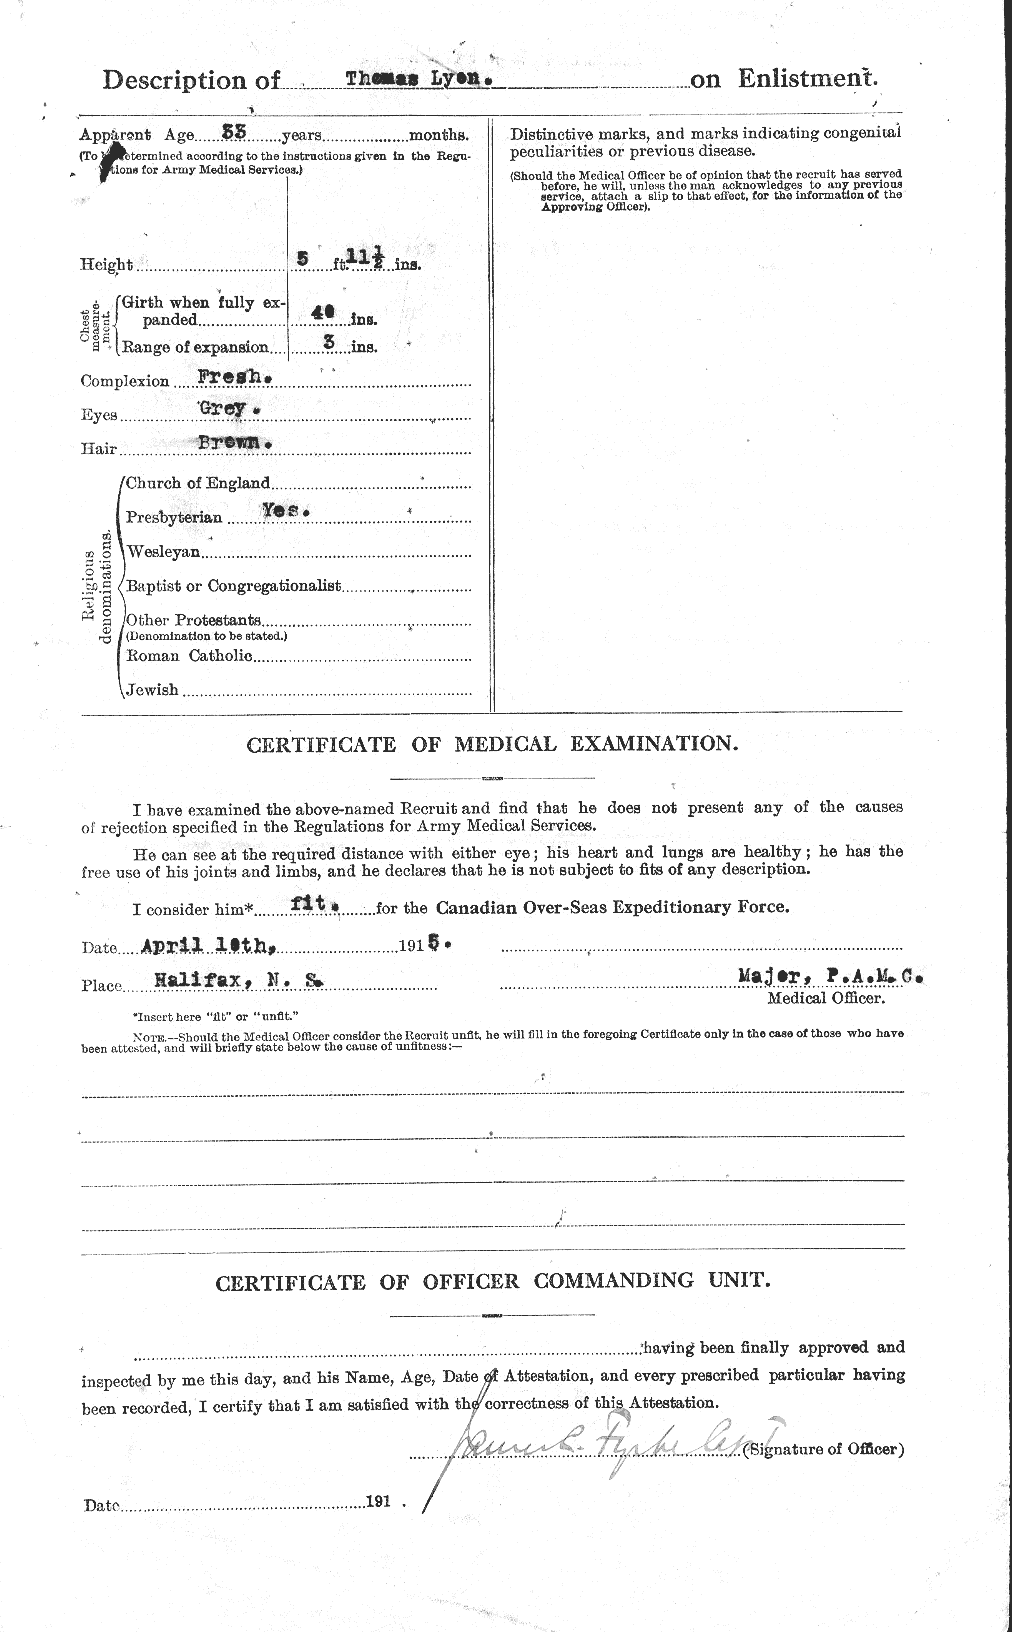 Personnel Records of the First World War - CEF 472970b